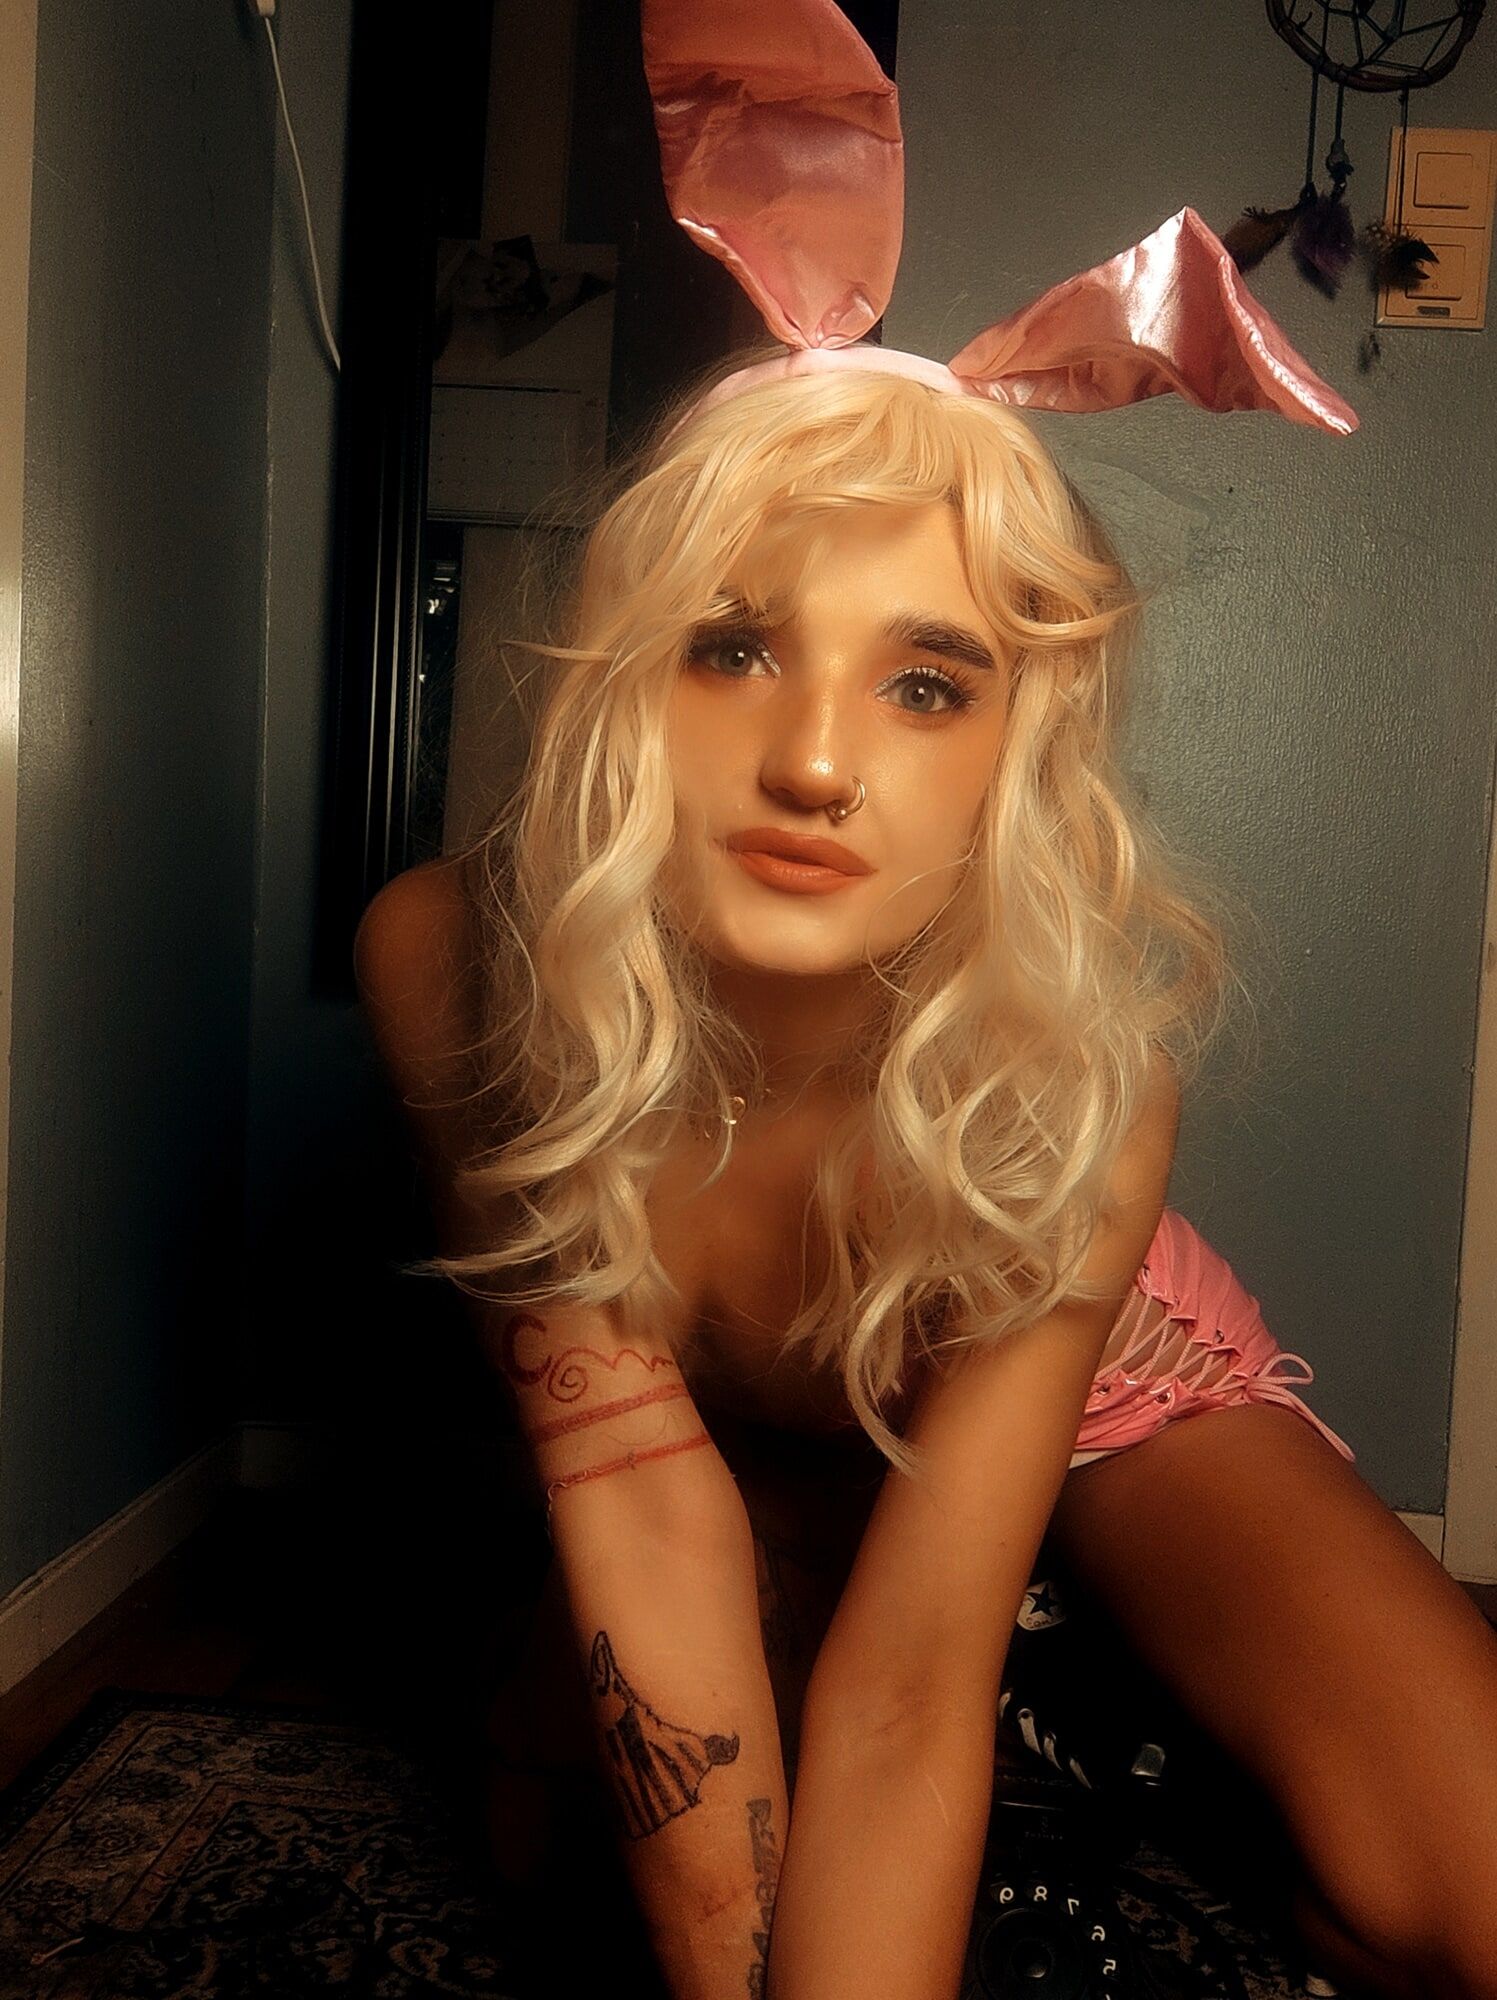 Pink bunny talking on the phone while showing off pussy #13